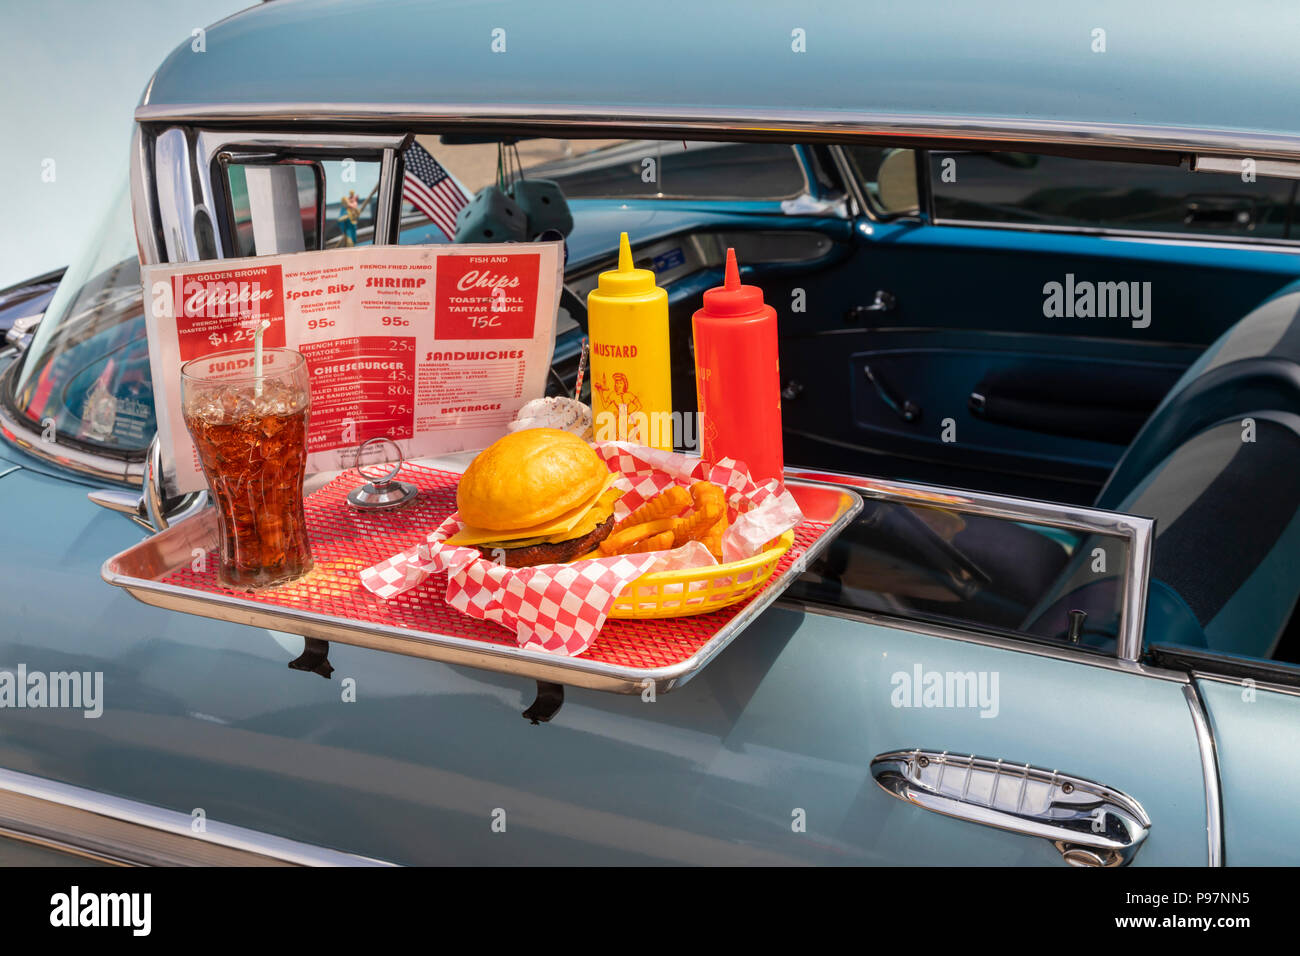 Detroit, Michigan - A 1958 Chevrolet Impala displays a drive-in restaurant food tray from the 1950s at an antique and custom car show, sponsored by th Stock Photo